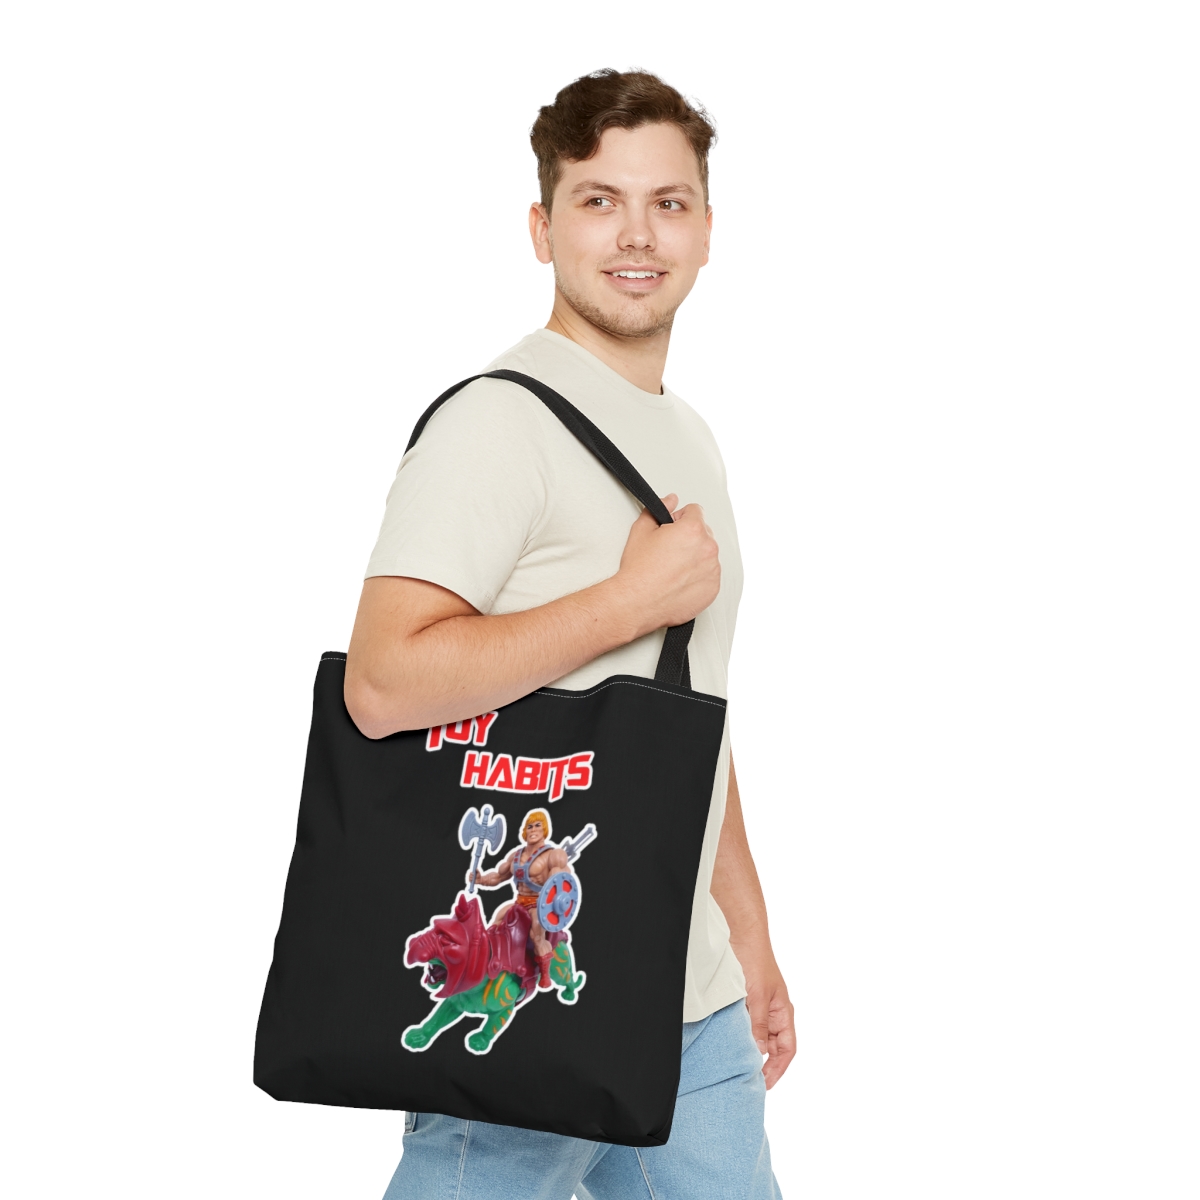 He-Man and Battle Cat Tote Bag product thumbnail image